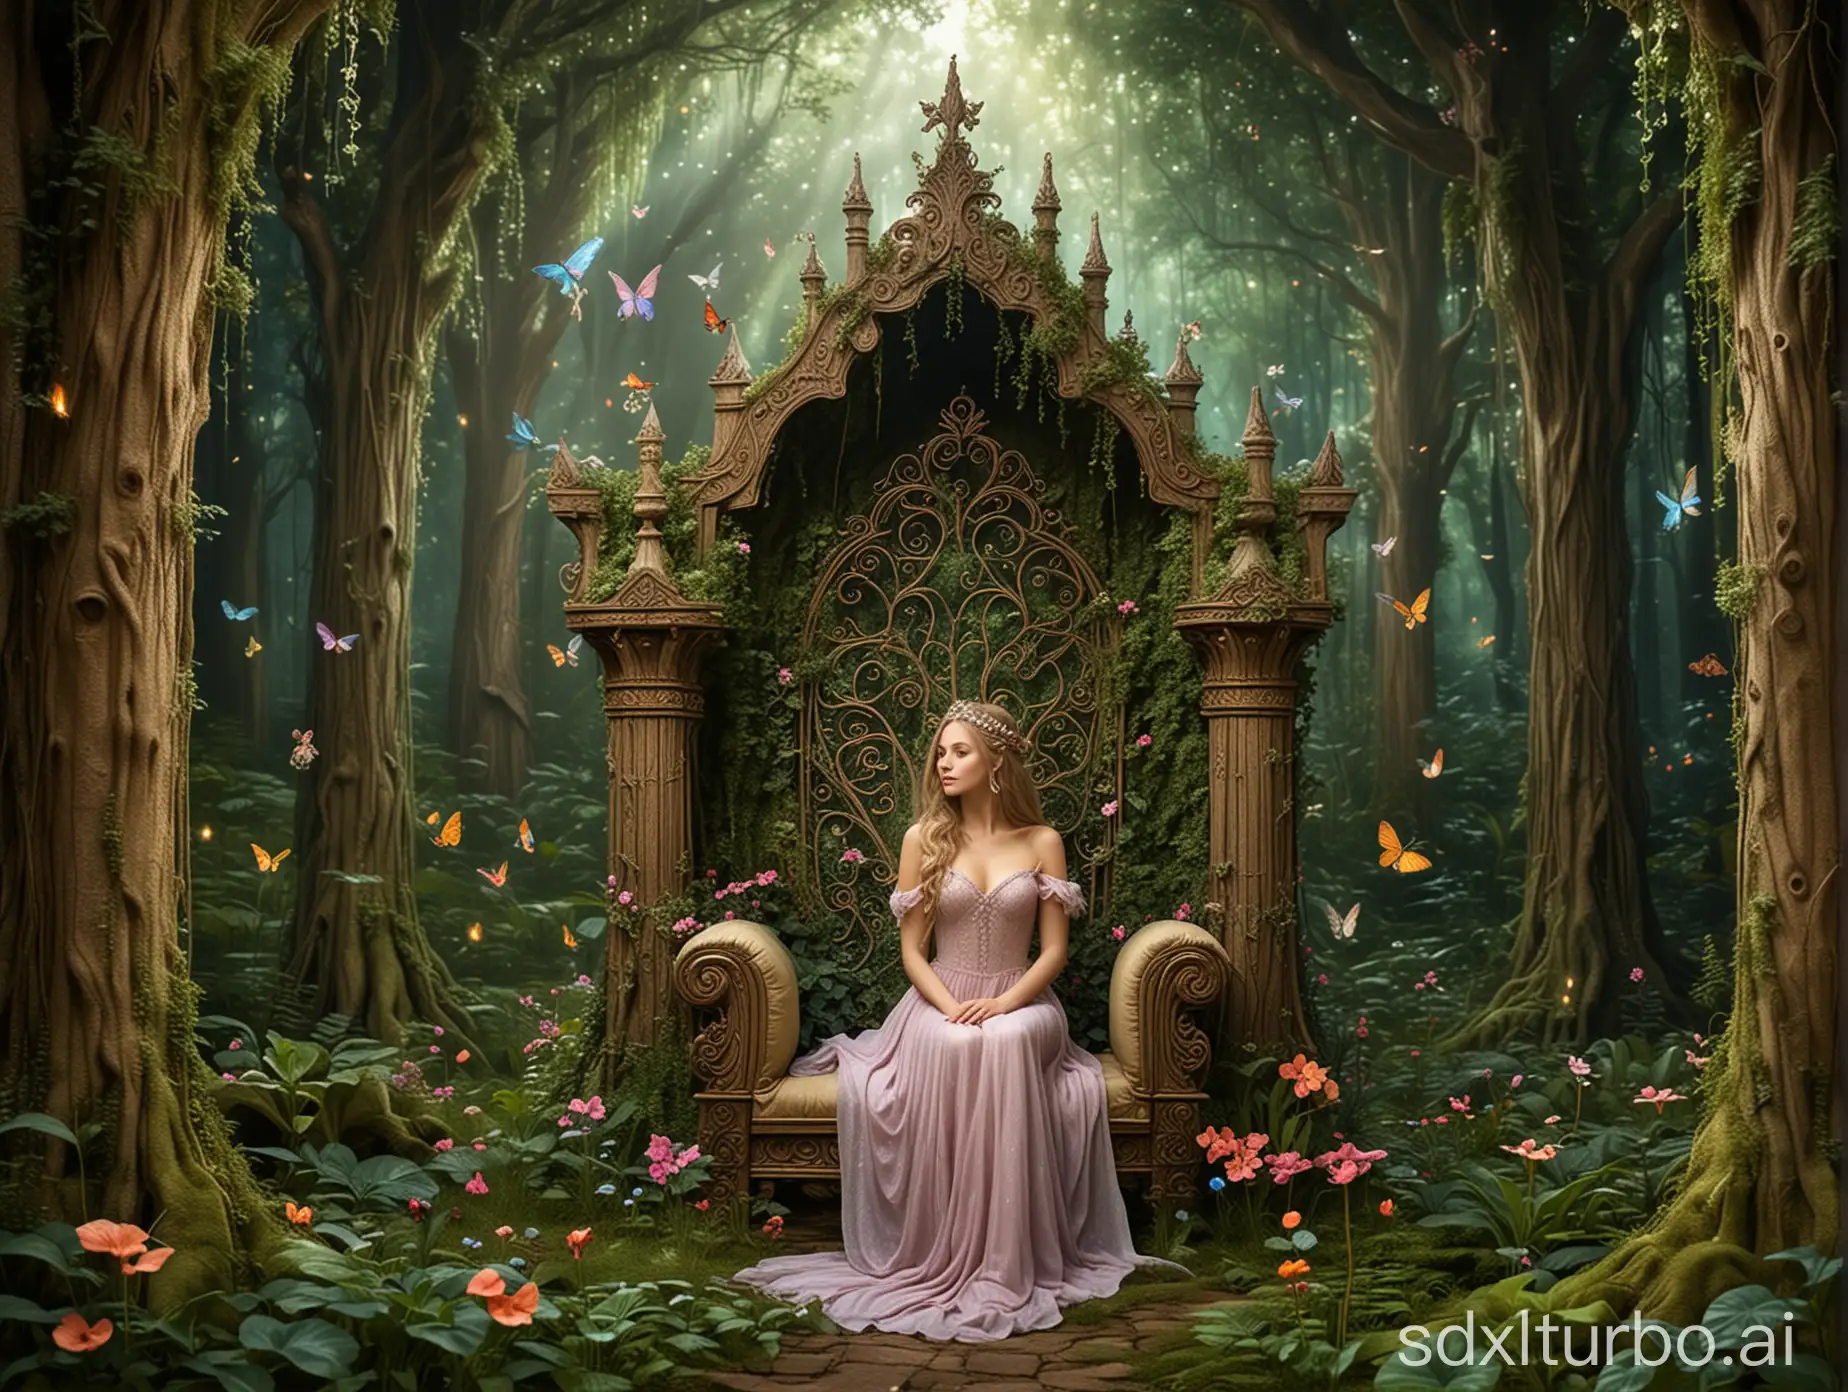 Enchanted-Forest-Fairy-Sitting-on-Majestic-Throne-in-Fairy-Palace